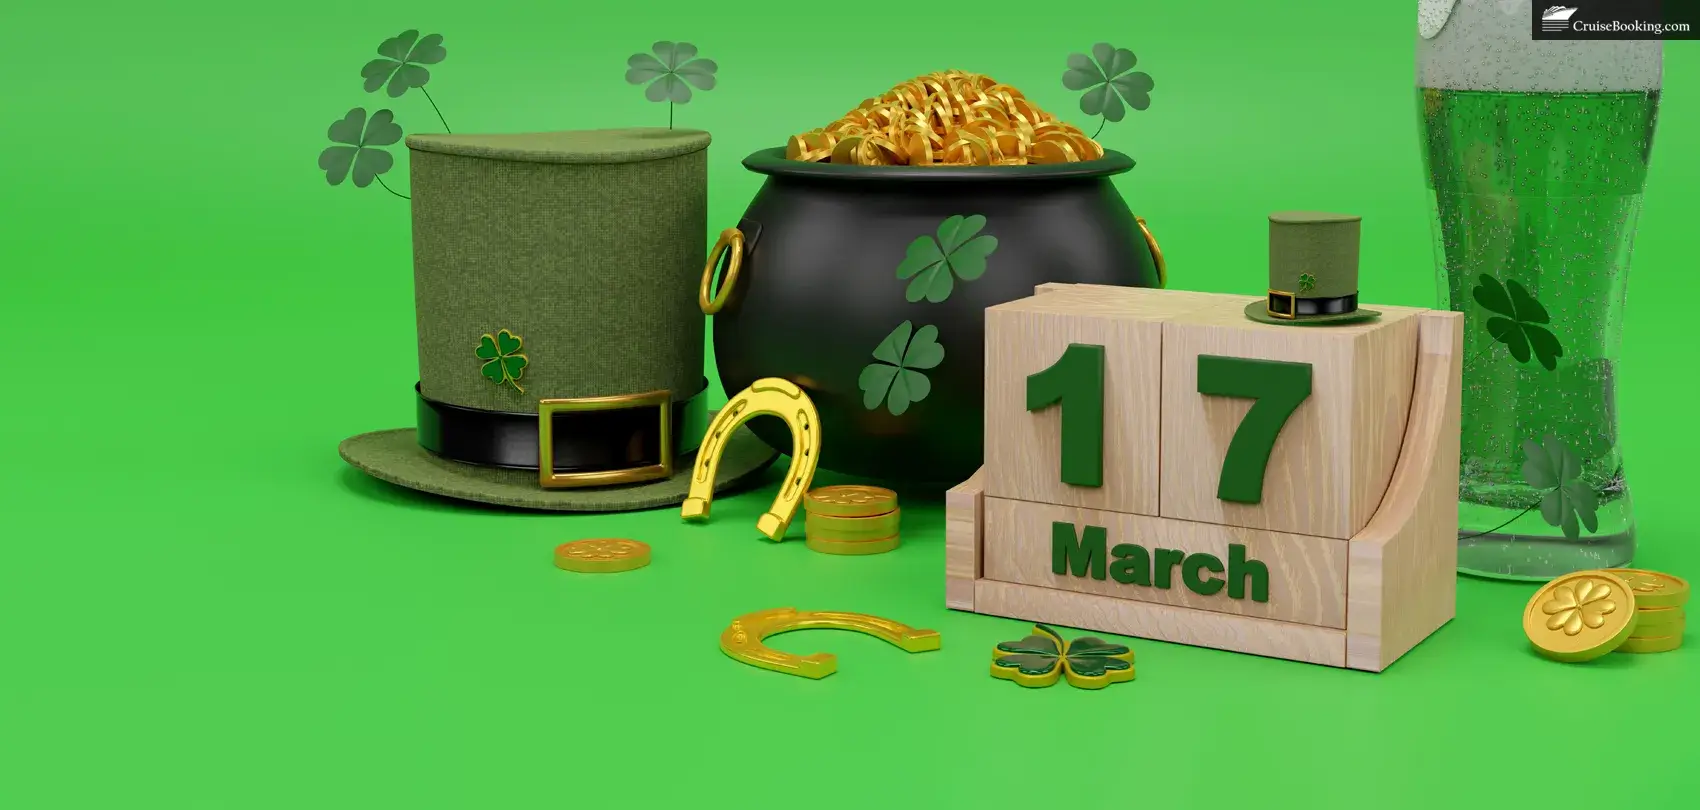 Hat, glass, podium for St. Patrick's Day greetings